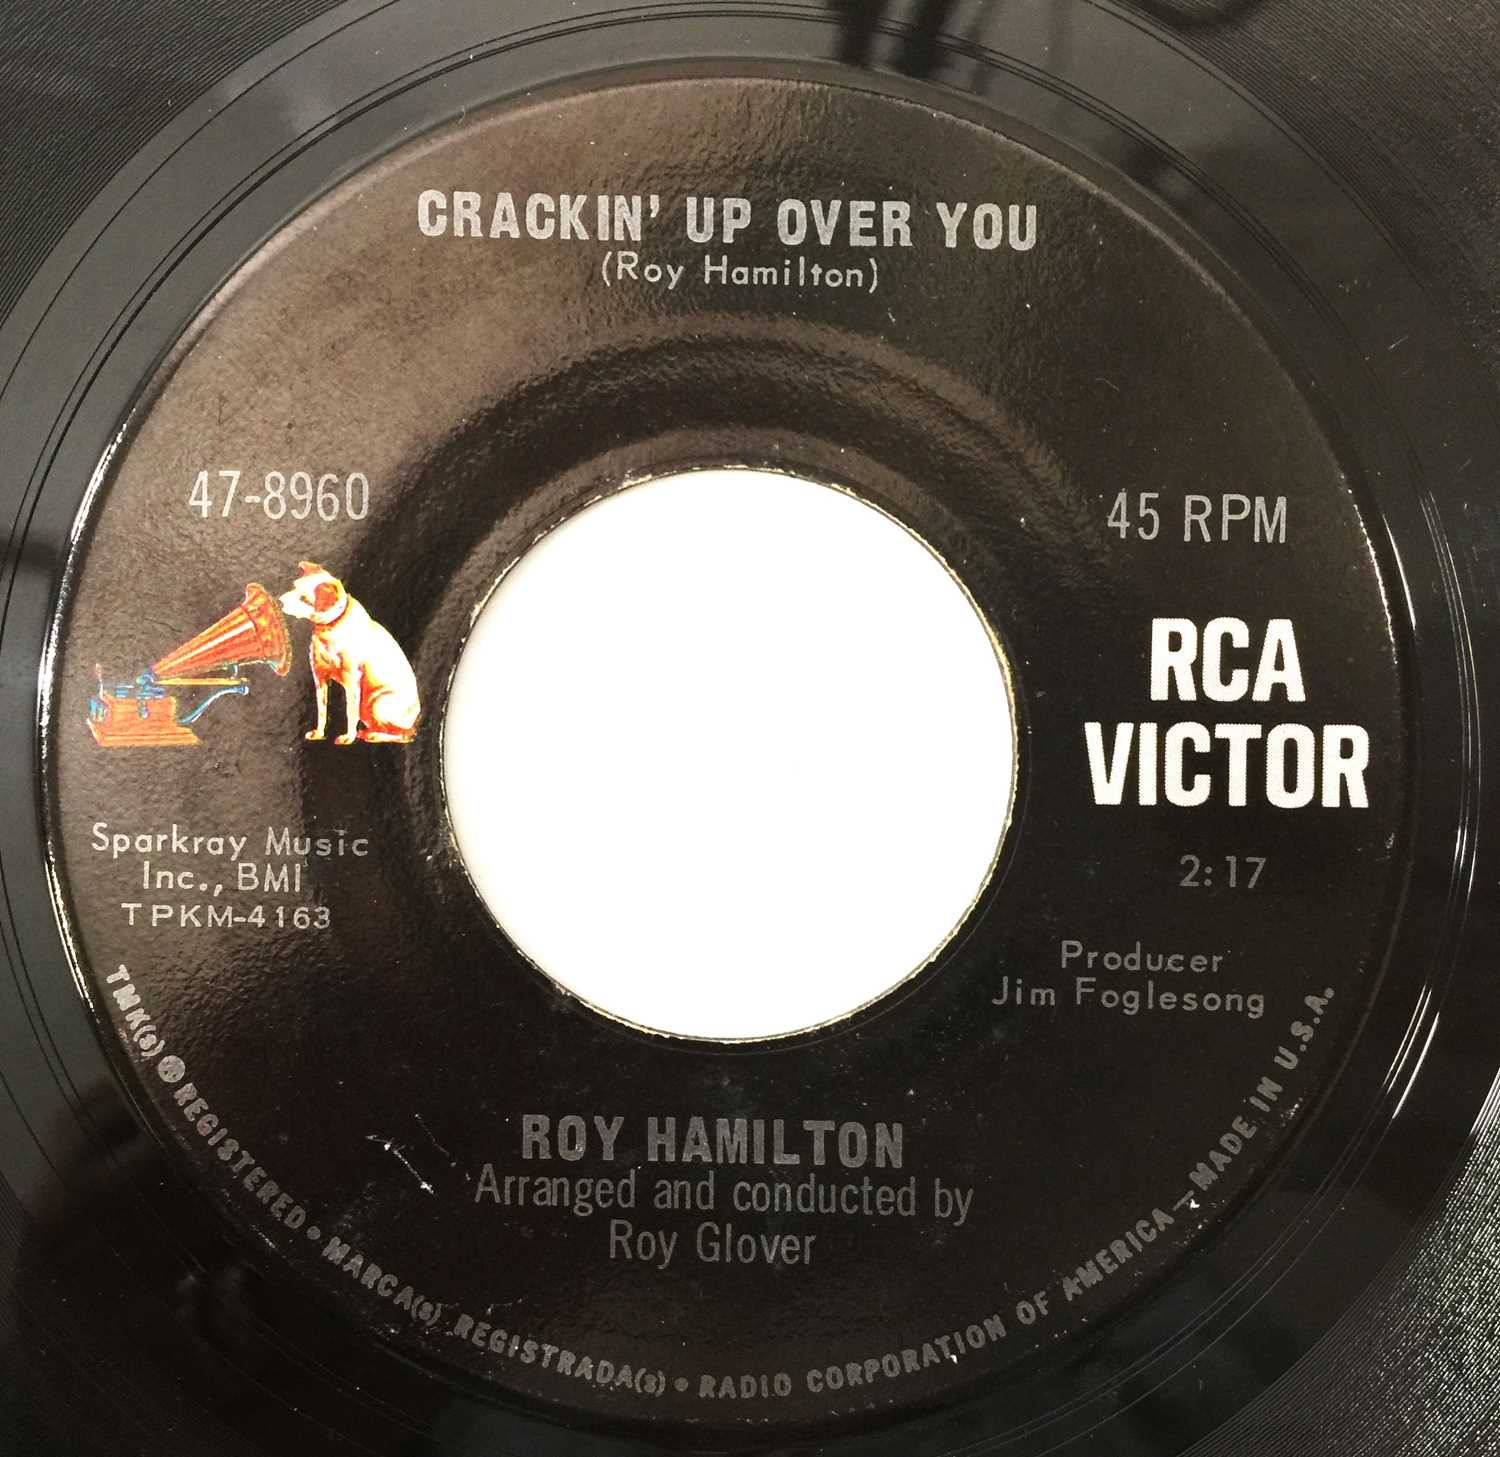 ROY HAMILTON - CRACKIN' UP OVER YOU/ WALK HAND IN HAND 7" (US NORTHERN - RCA VICTOR - 47-8960) - Image 2 of 3